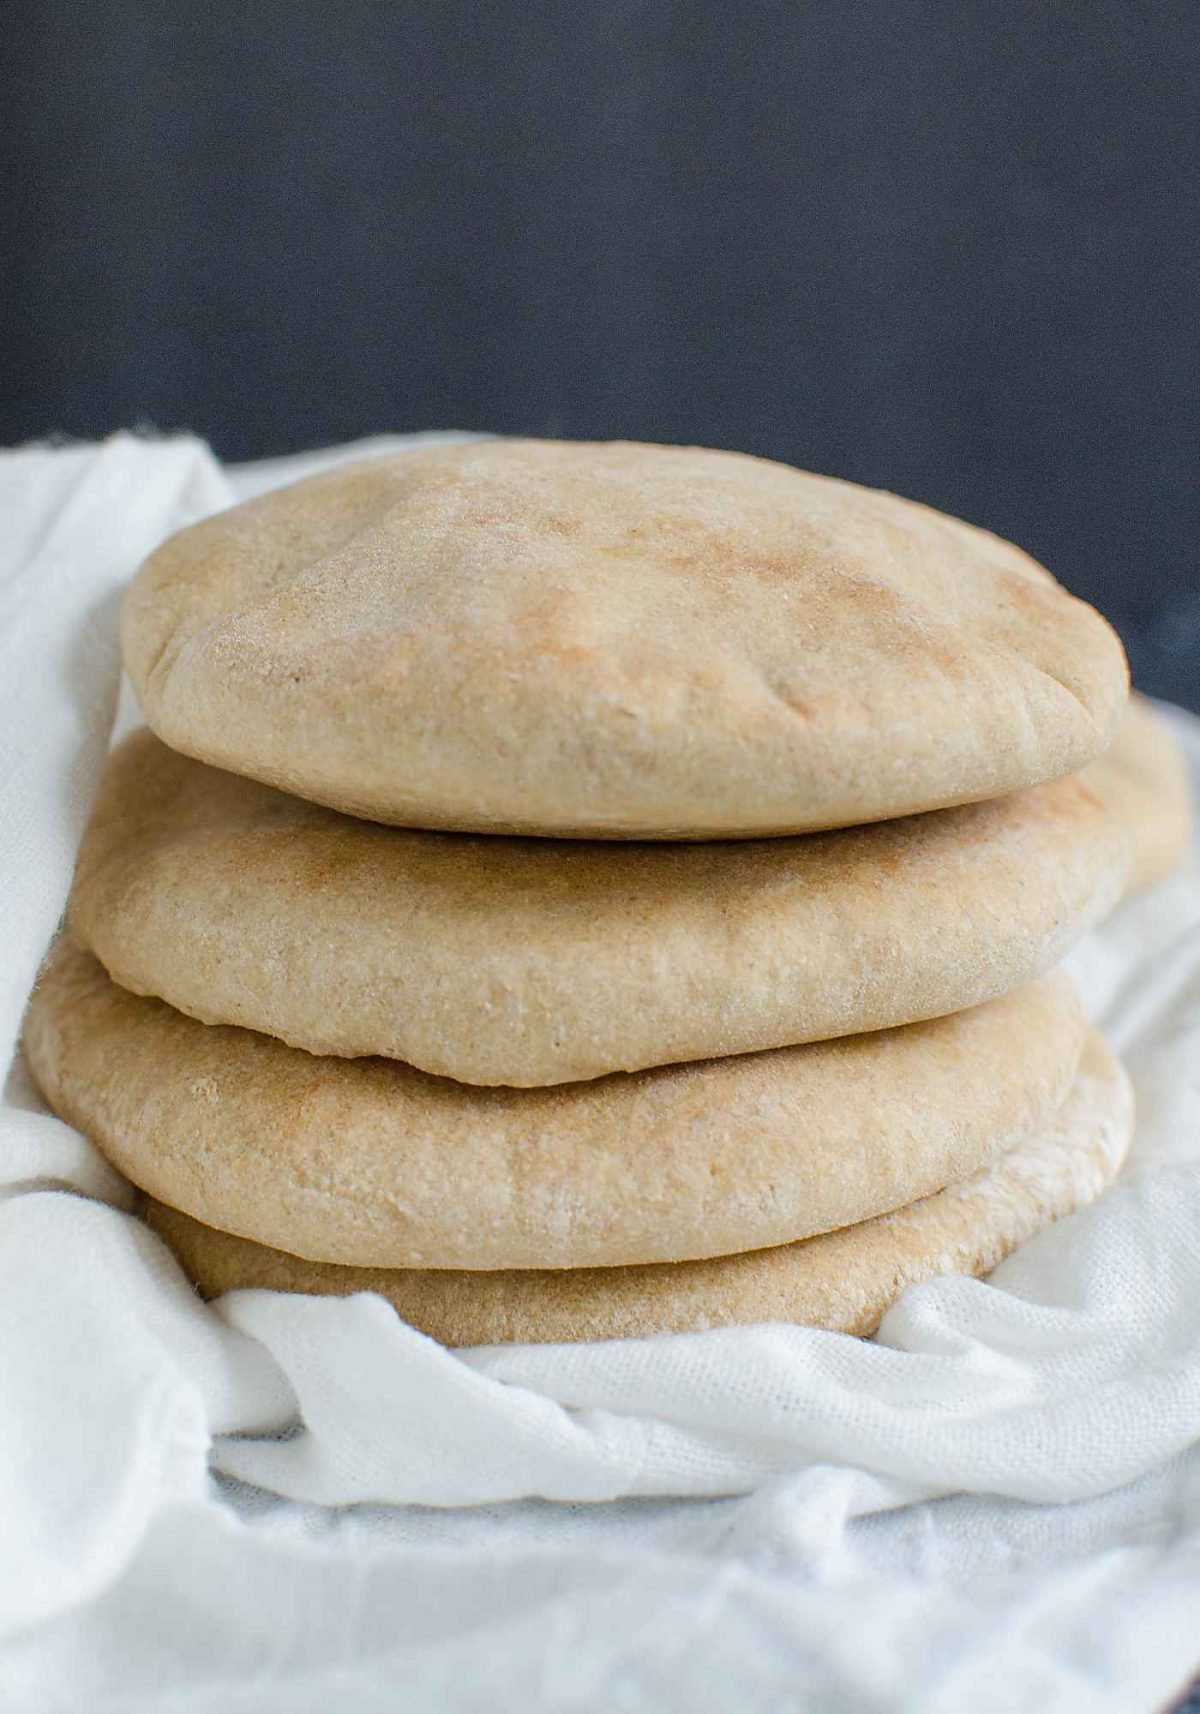 Soft Fluffy And Healthy Homemade Whole Wheat Pita Bread,Cocktail Drinks With Rum